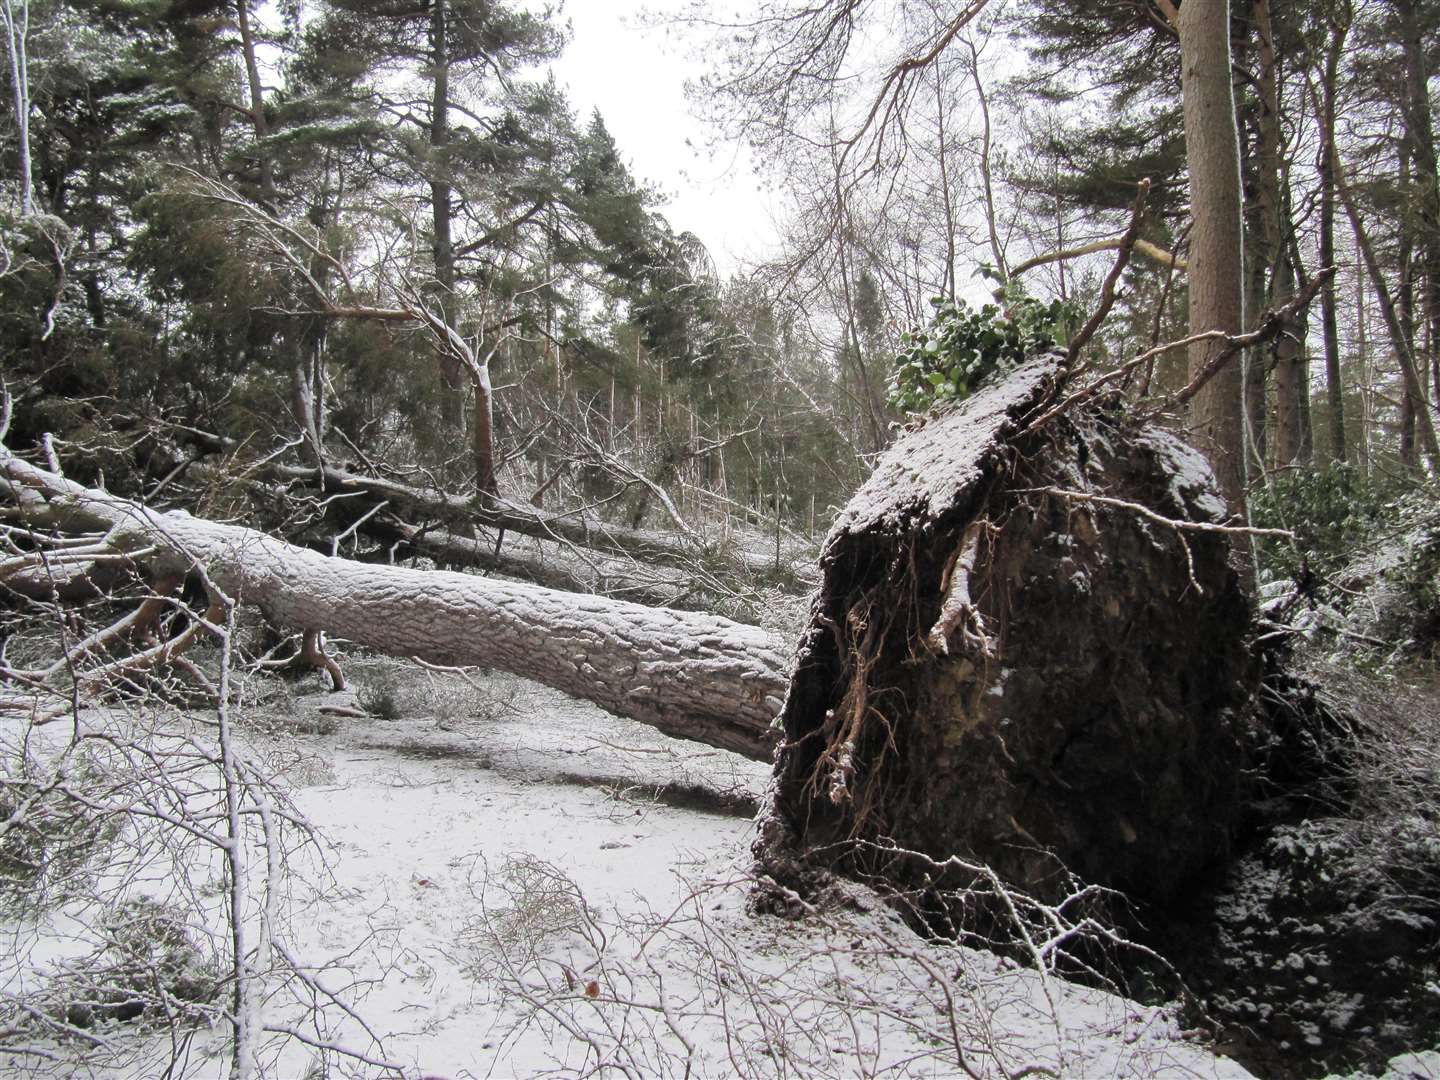 Storm Arwen brought disruption to Northumberland (National Trust/PA)